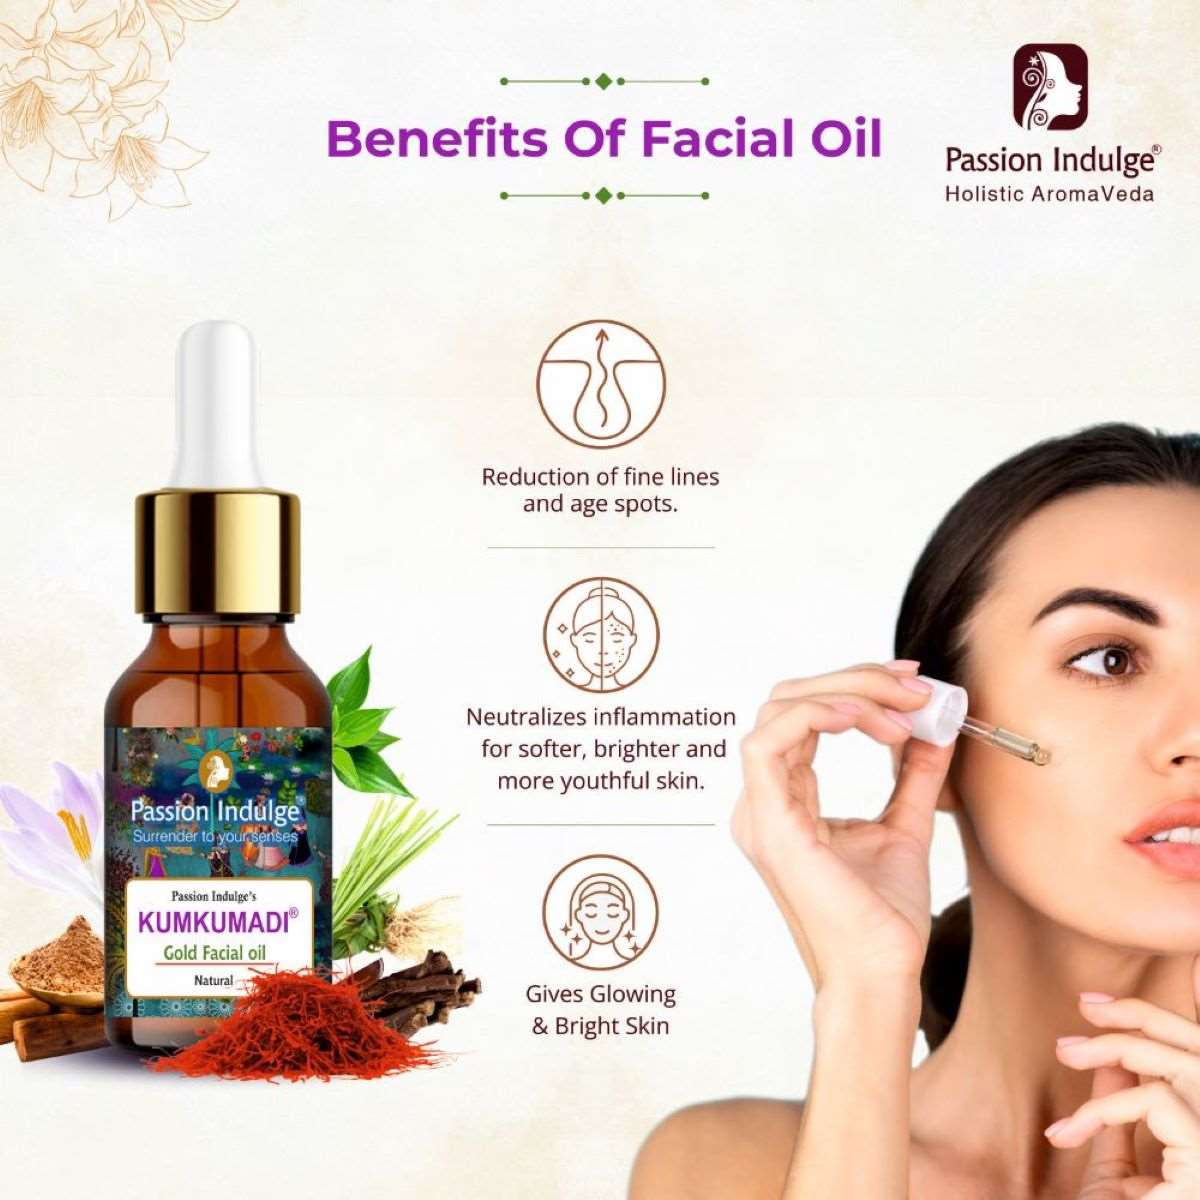 Kumkumadi Facial Oil 10ml & Cleanser 100ml For Glowing Skin | Shine & Brightness | Anti Ageing | Anti Wrinkle | Pigmentation | With Saffron, Vetiver & 16 Herbs | Natural & Ayurvedic | for all Skin Type